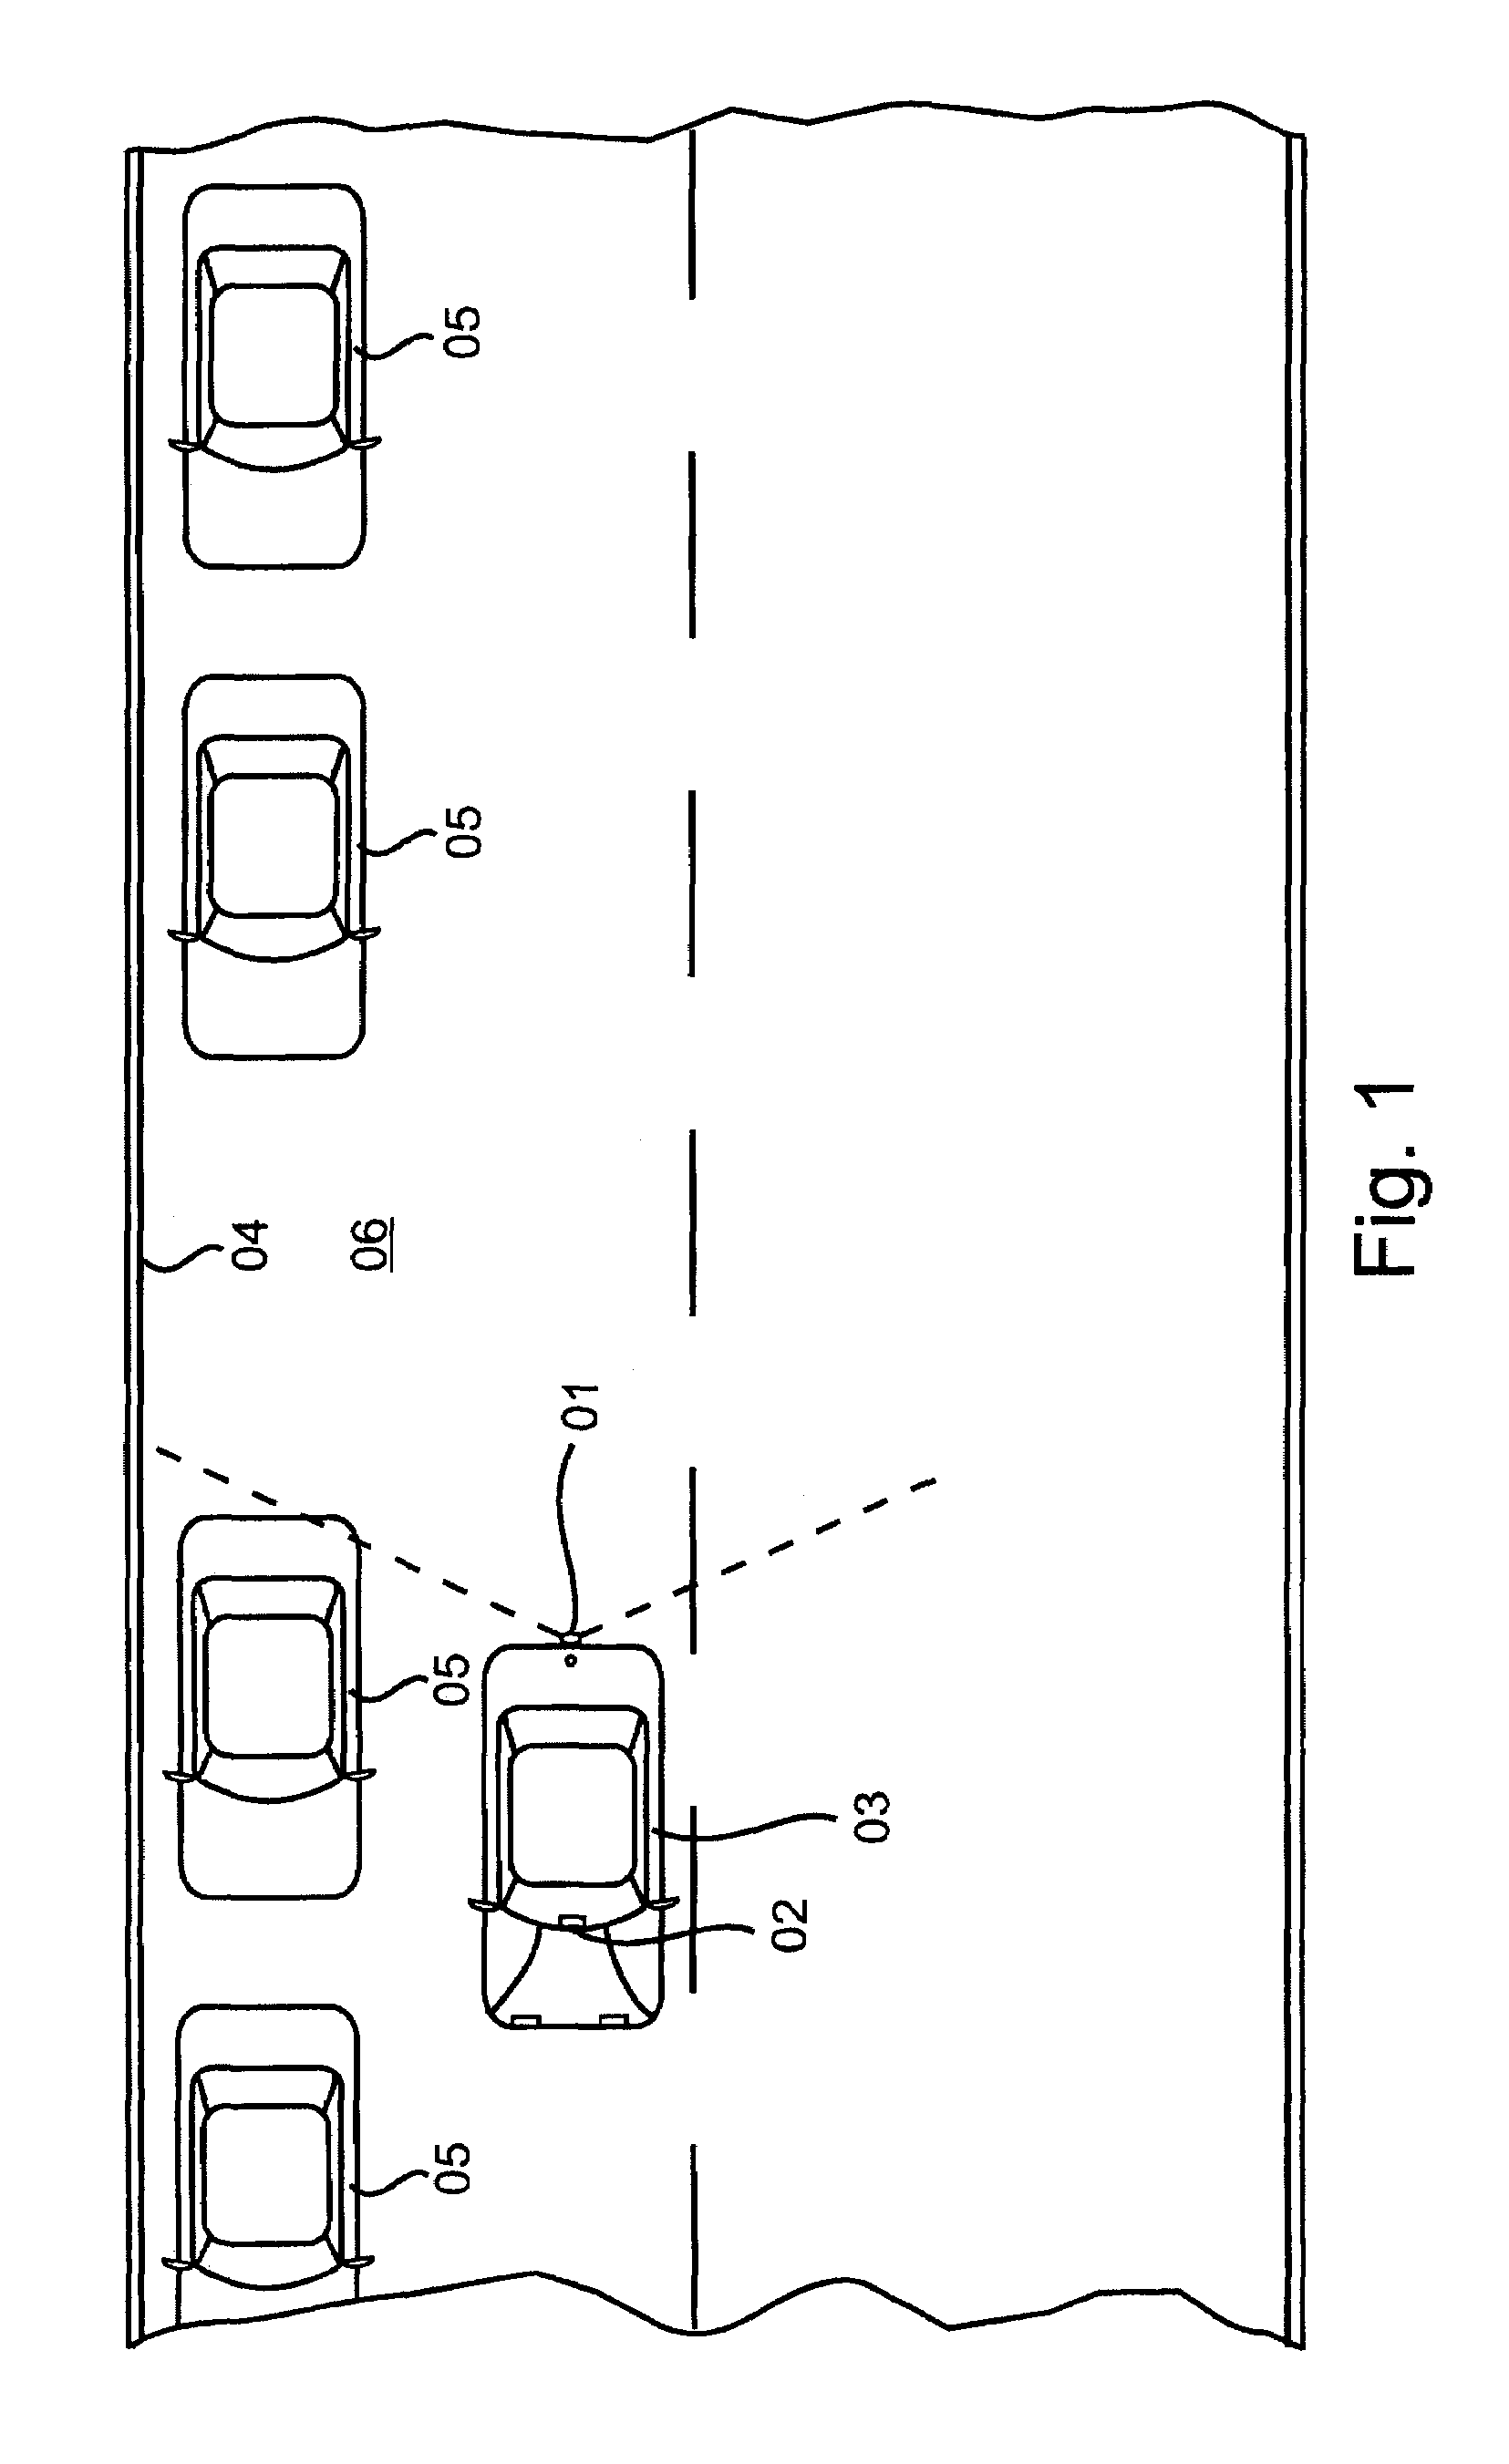 Method of operating a display system in a vehicle for finding a parking place